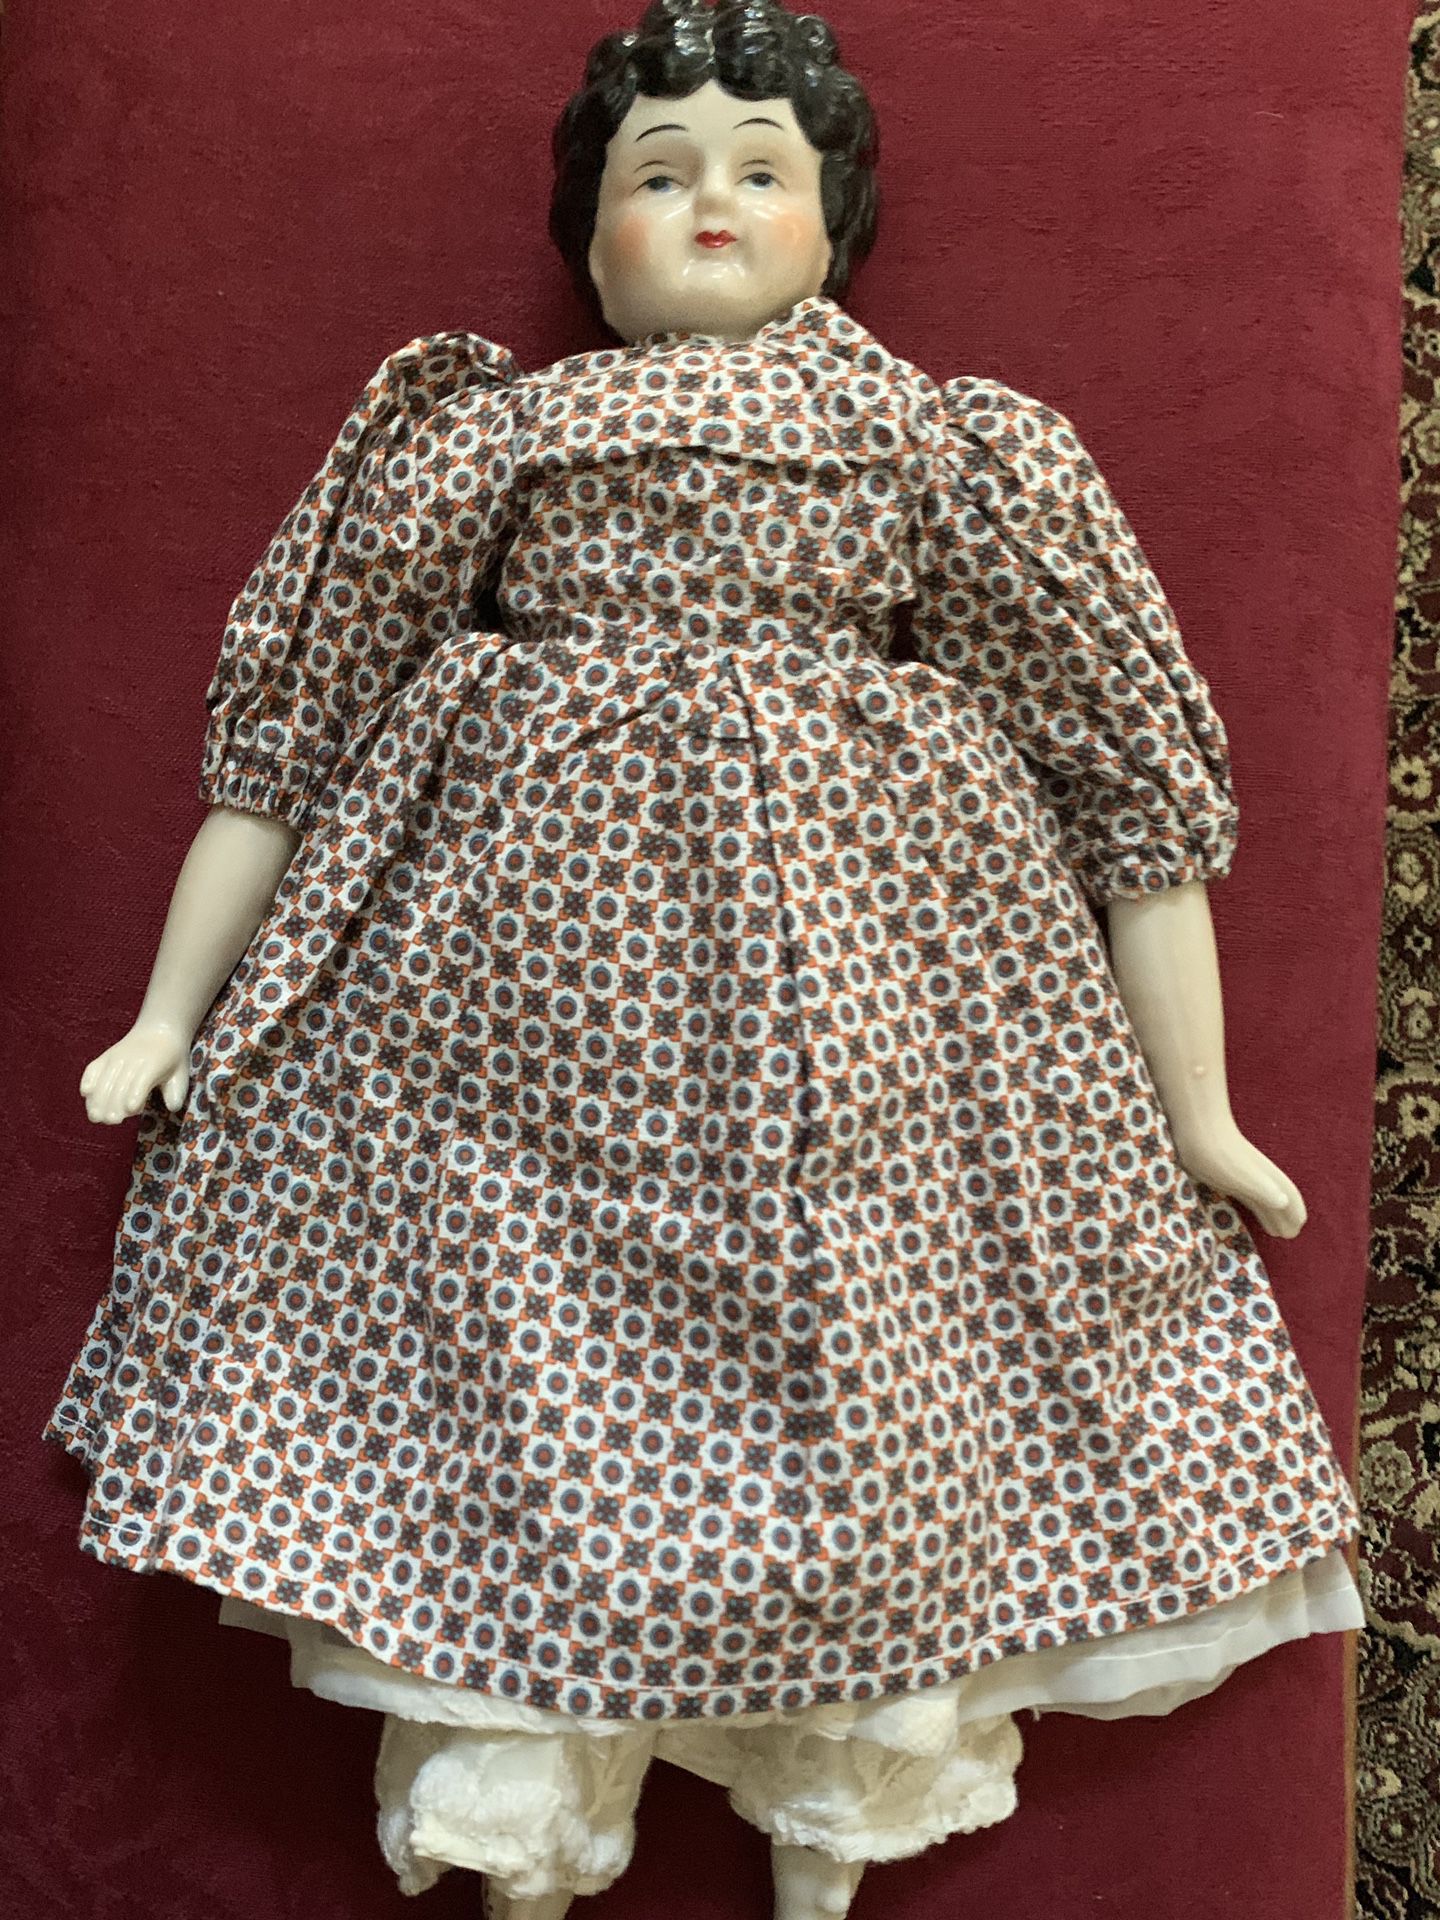 VINTAGE PORCELAIN DOLL ORIGINAL DRESS AND PETTICOAT 16.5 Inches